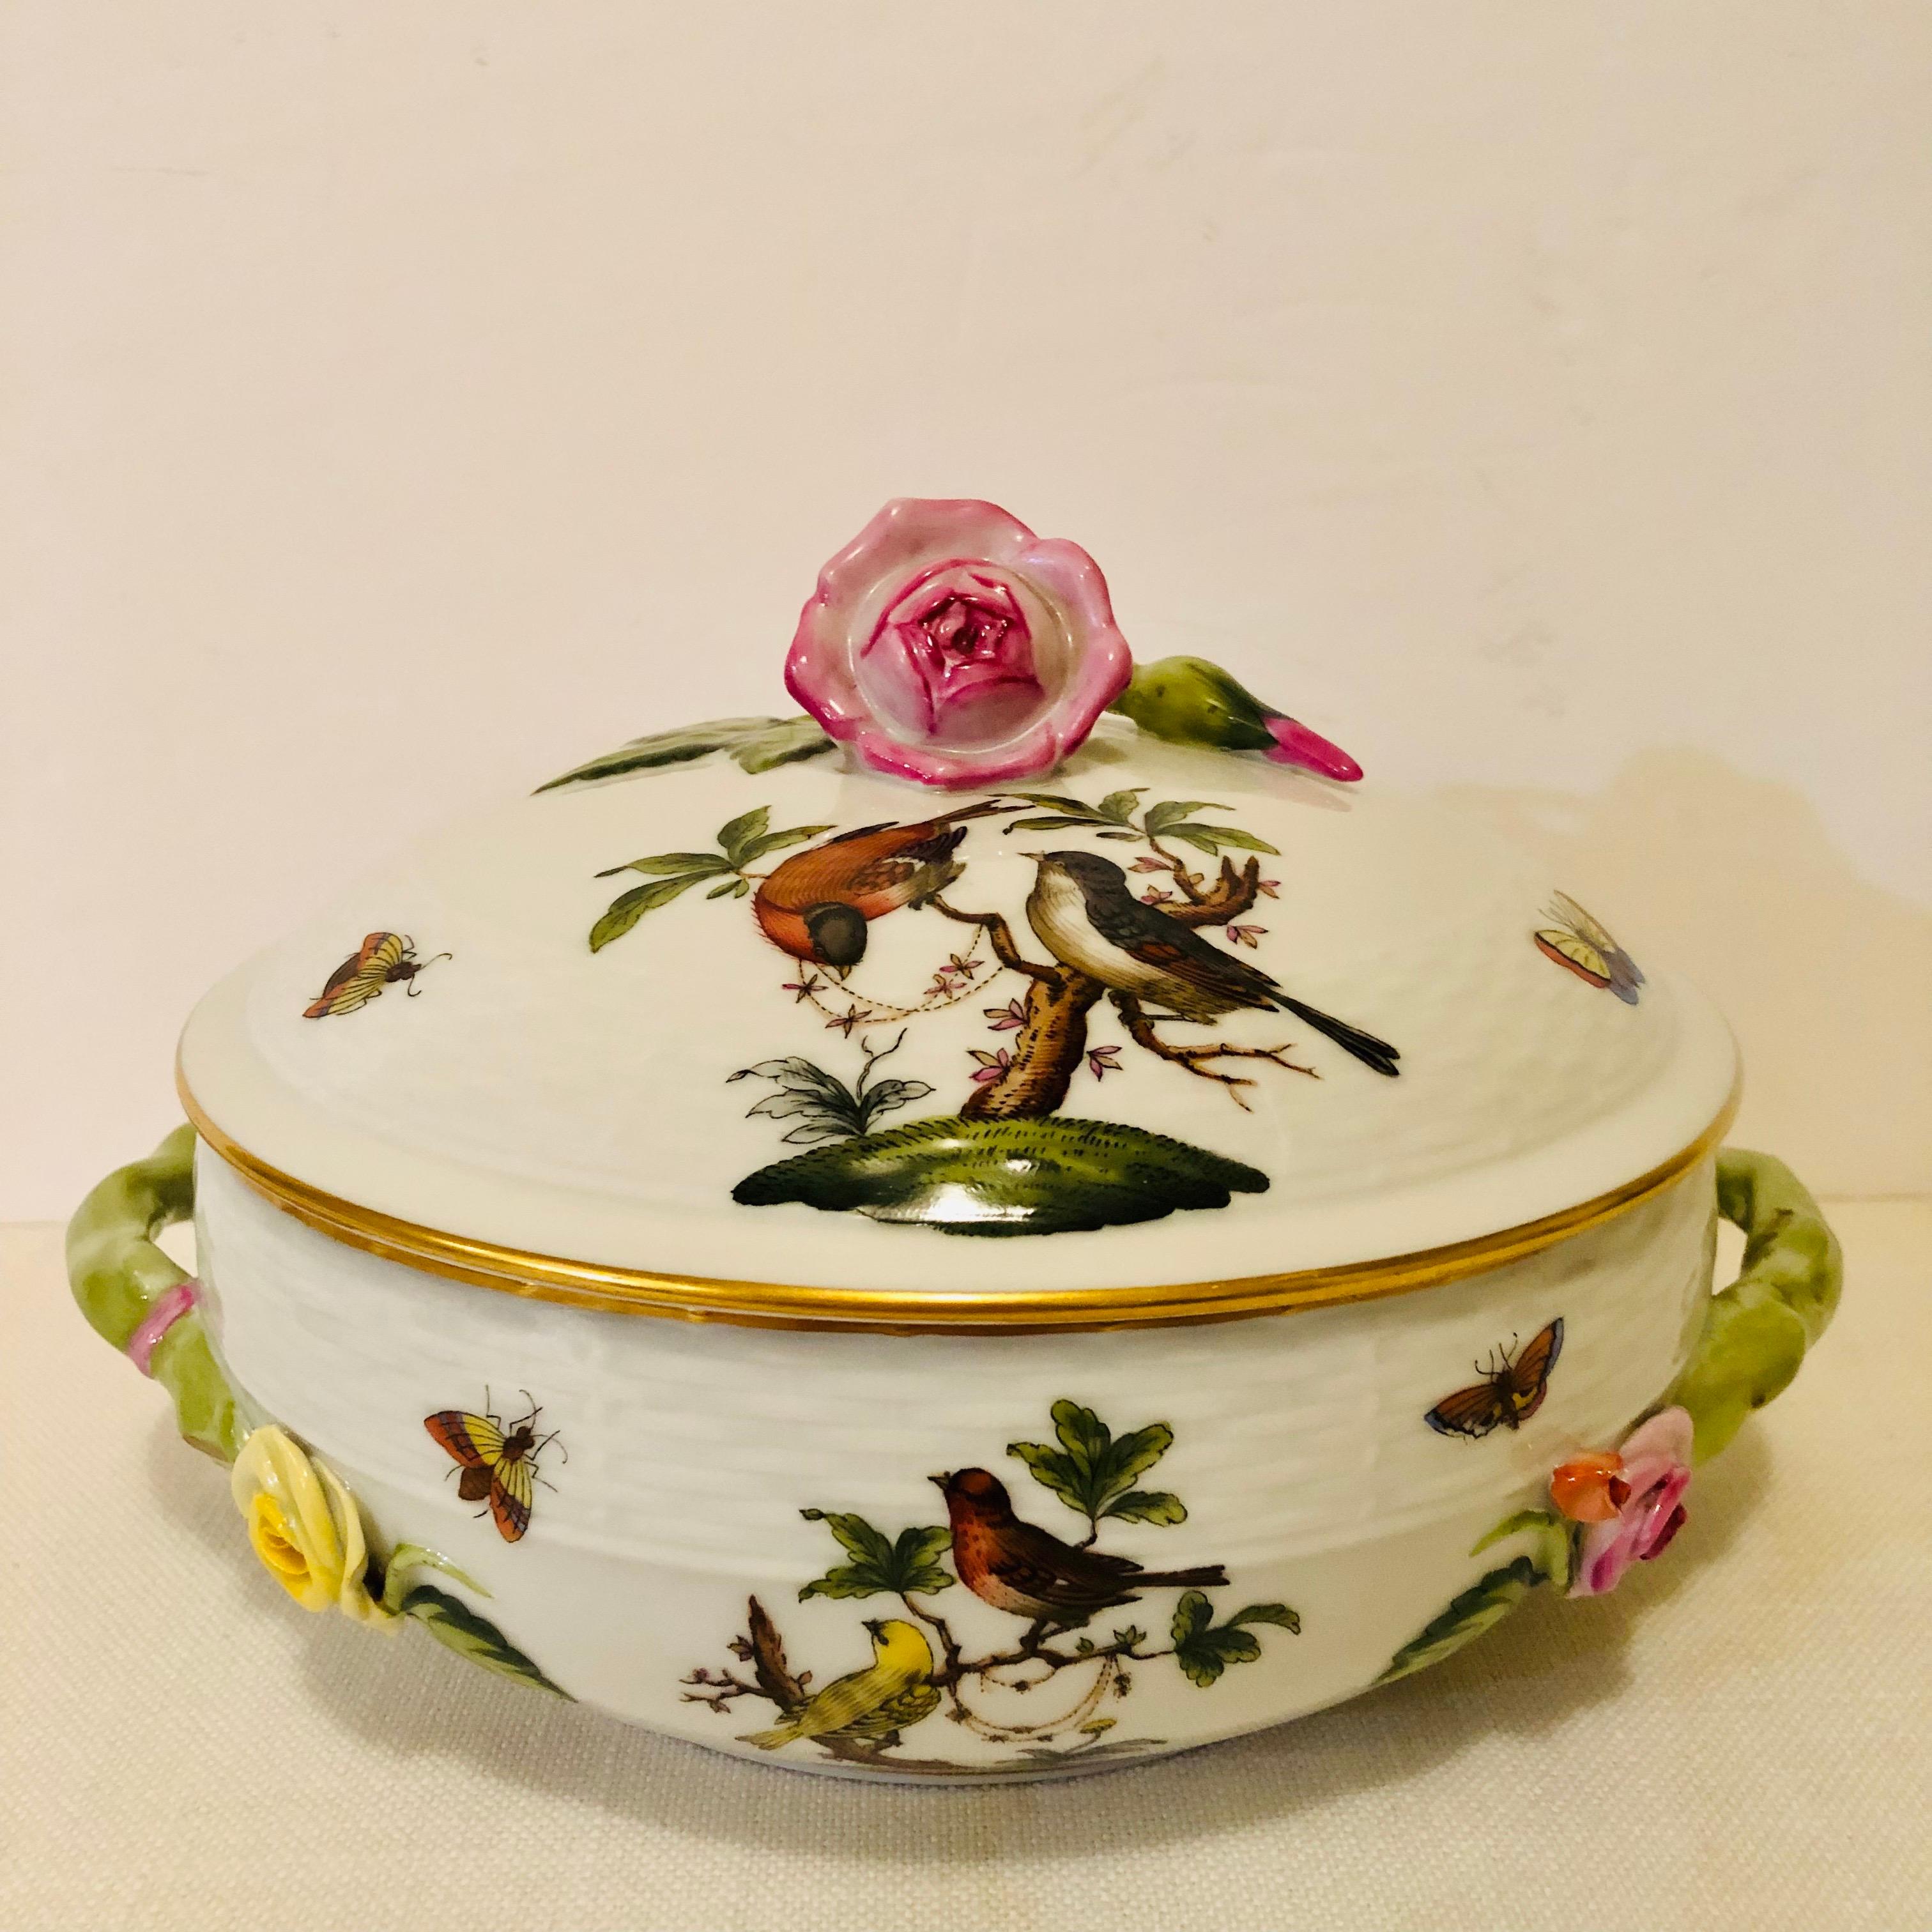 This is a wonderful rare and beautiful Herend covered bowl in the Rothschild Bird Pattern. On the bottom of this covered bowl, you can see the wonderful paintings of the pairs of birds on each side surrounded by accents of colorful butterflies and